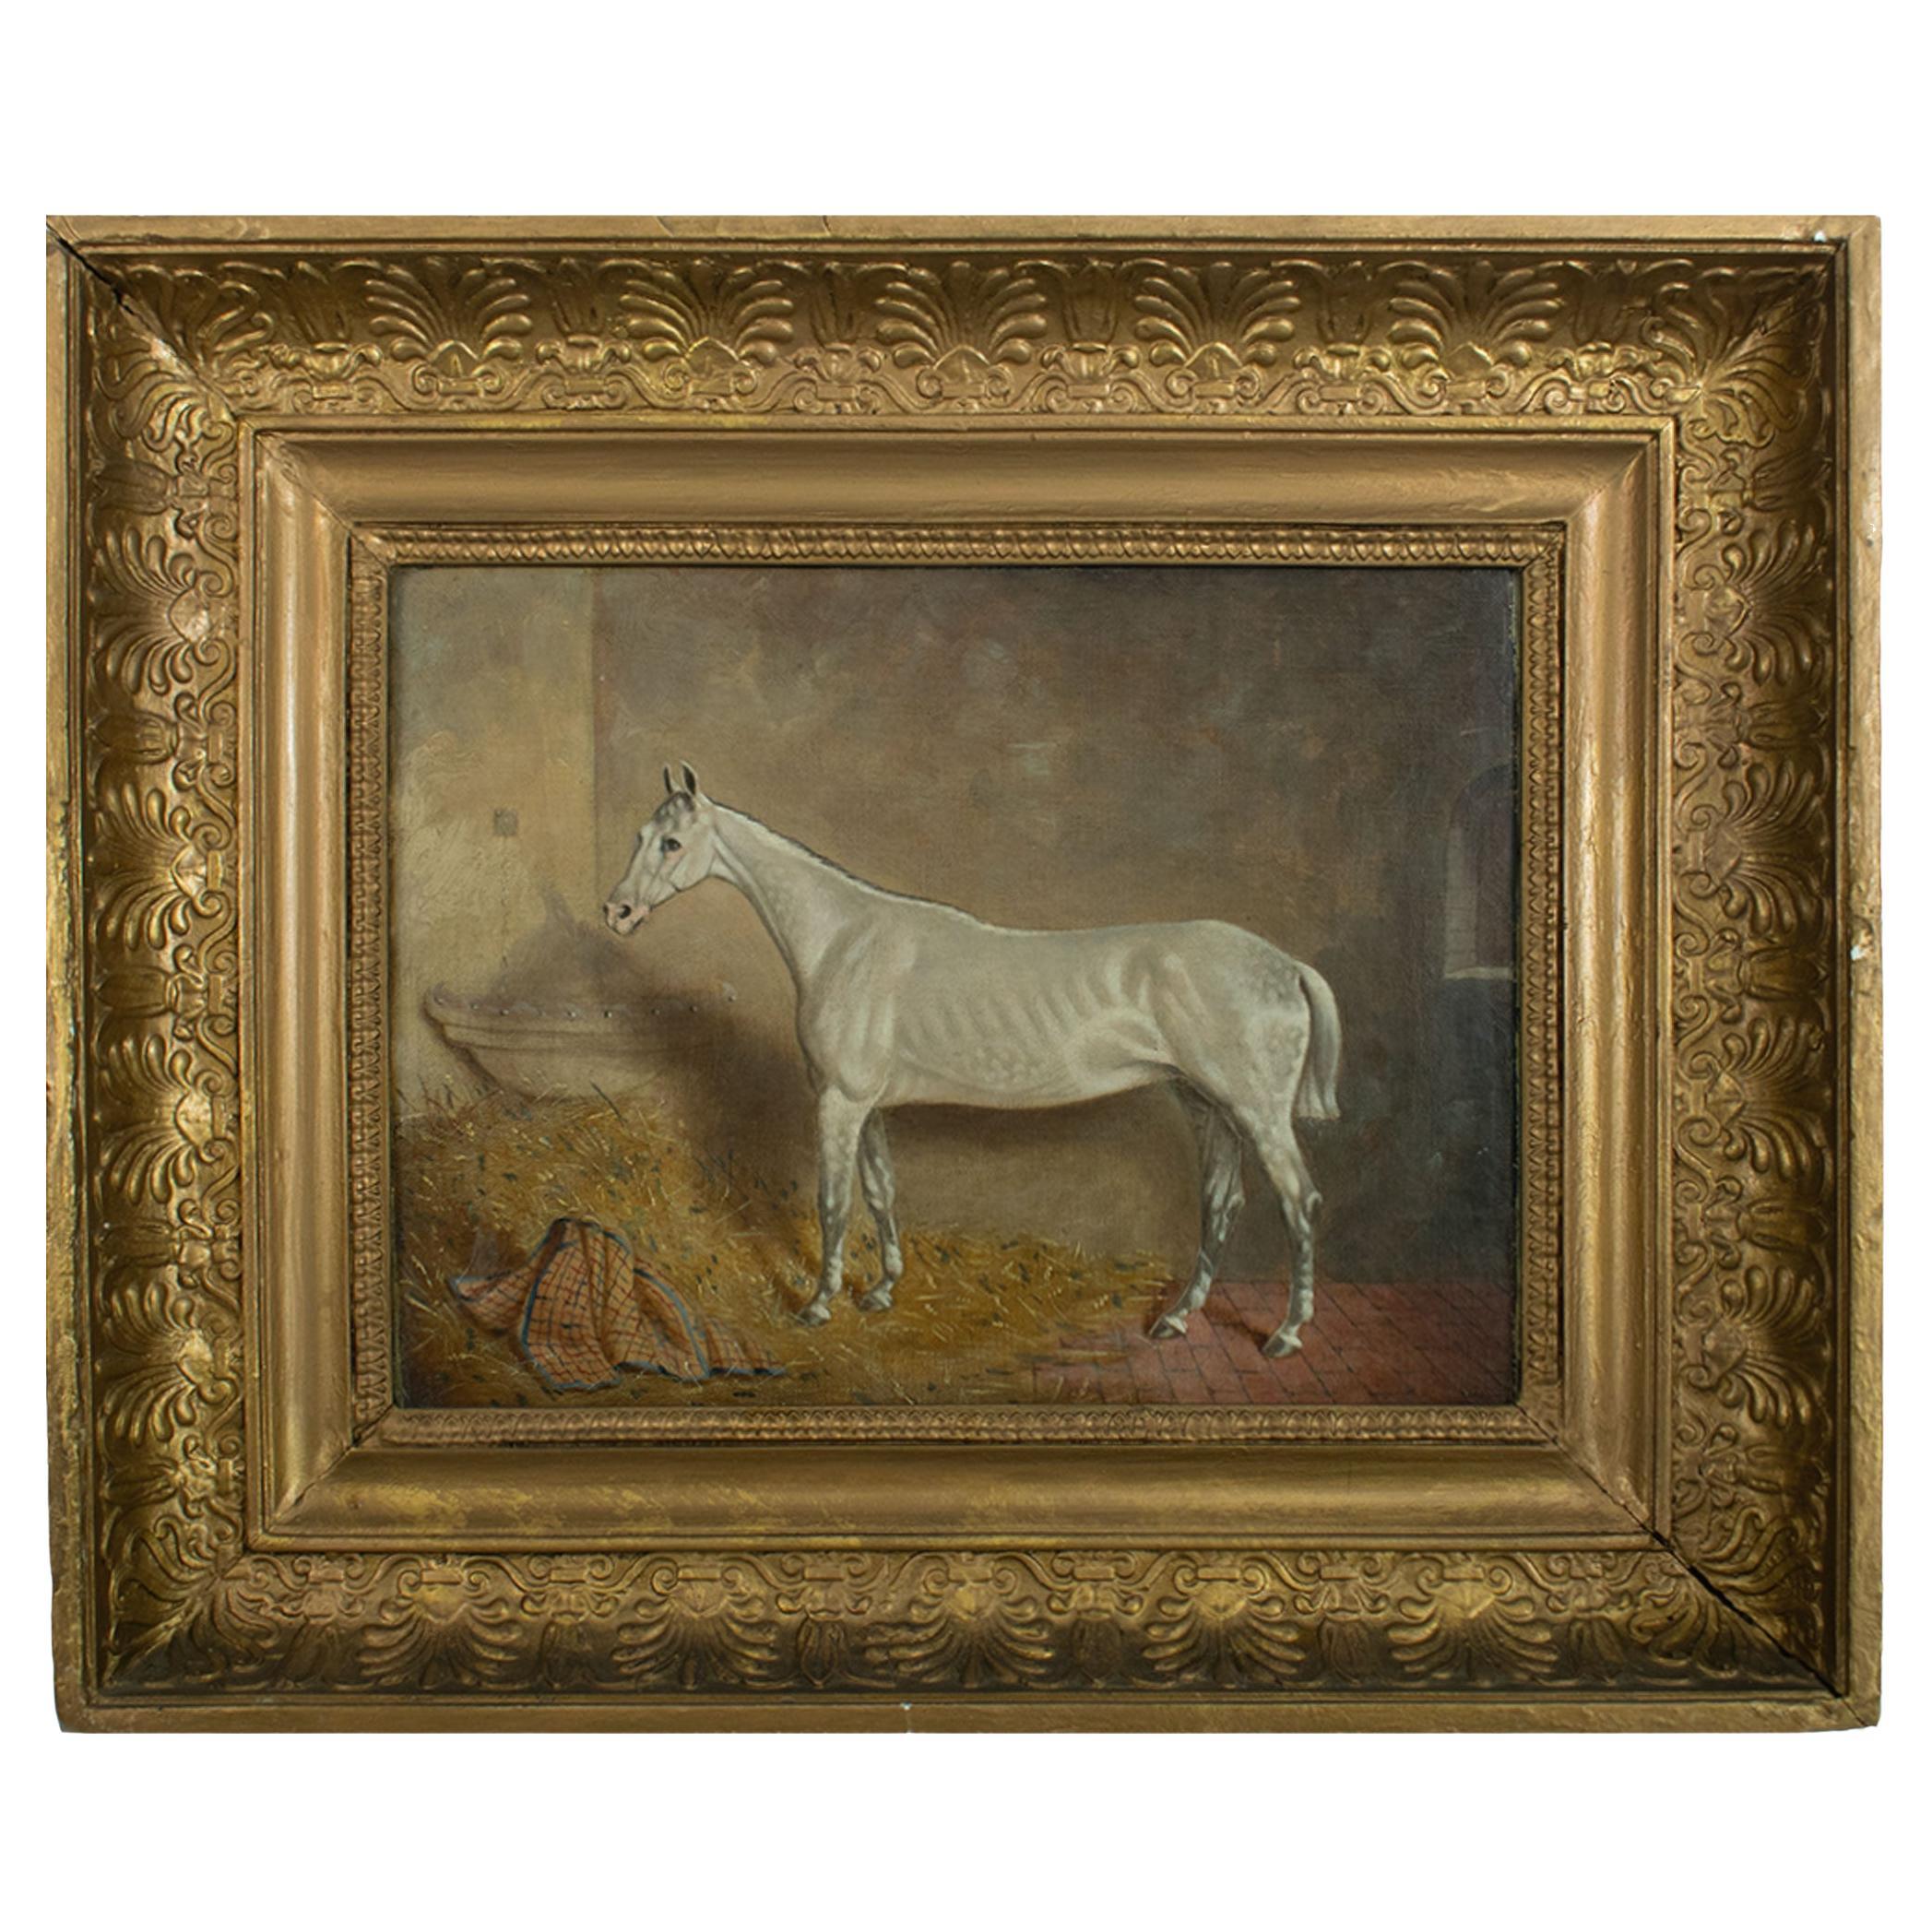 J Truman, dated 1870, Portrait of a White Horse in its Stable, Signed